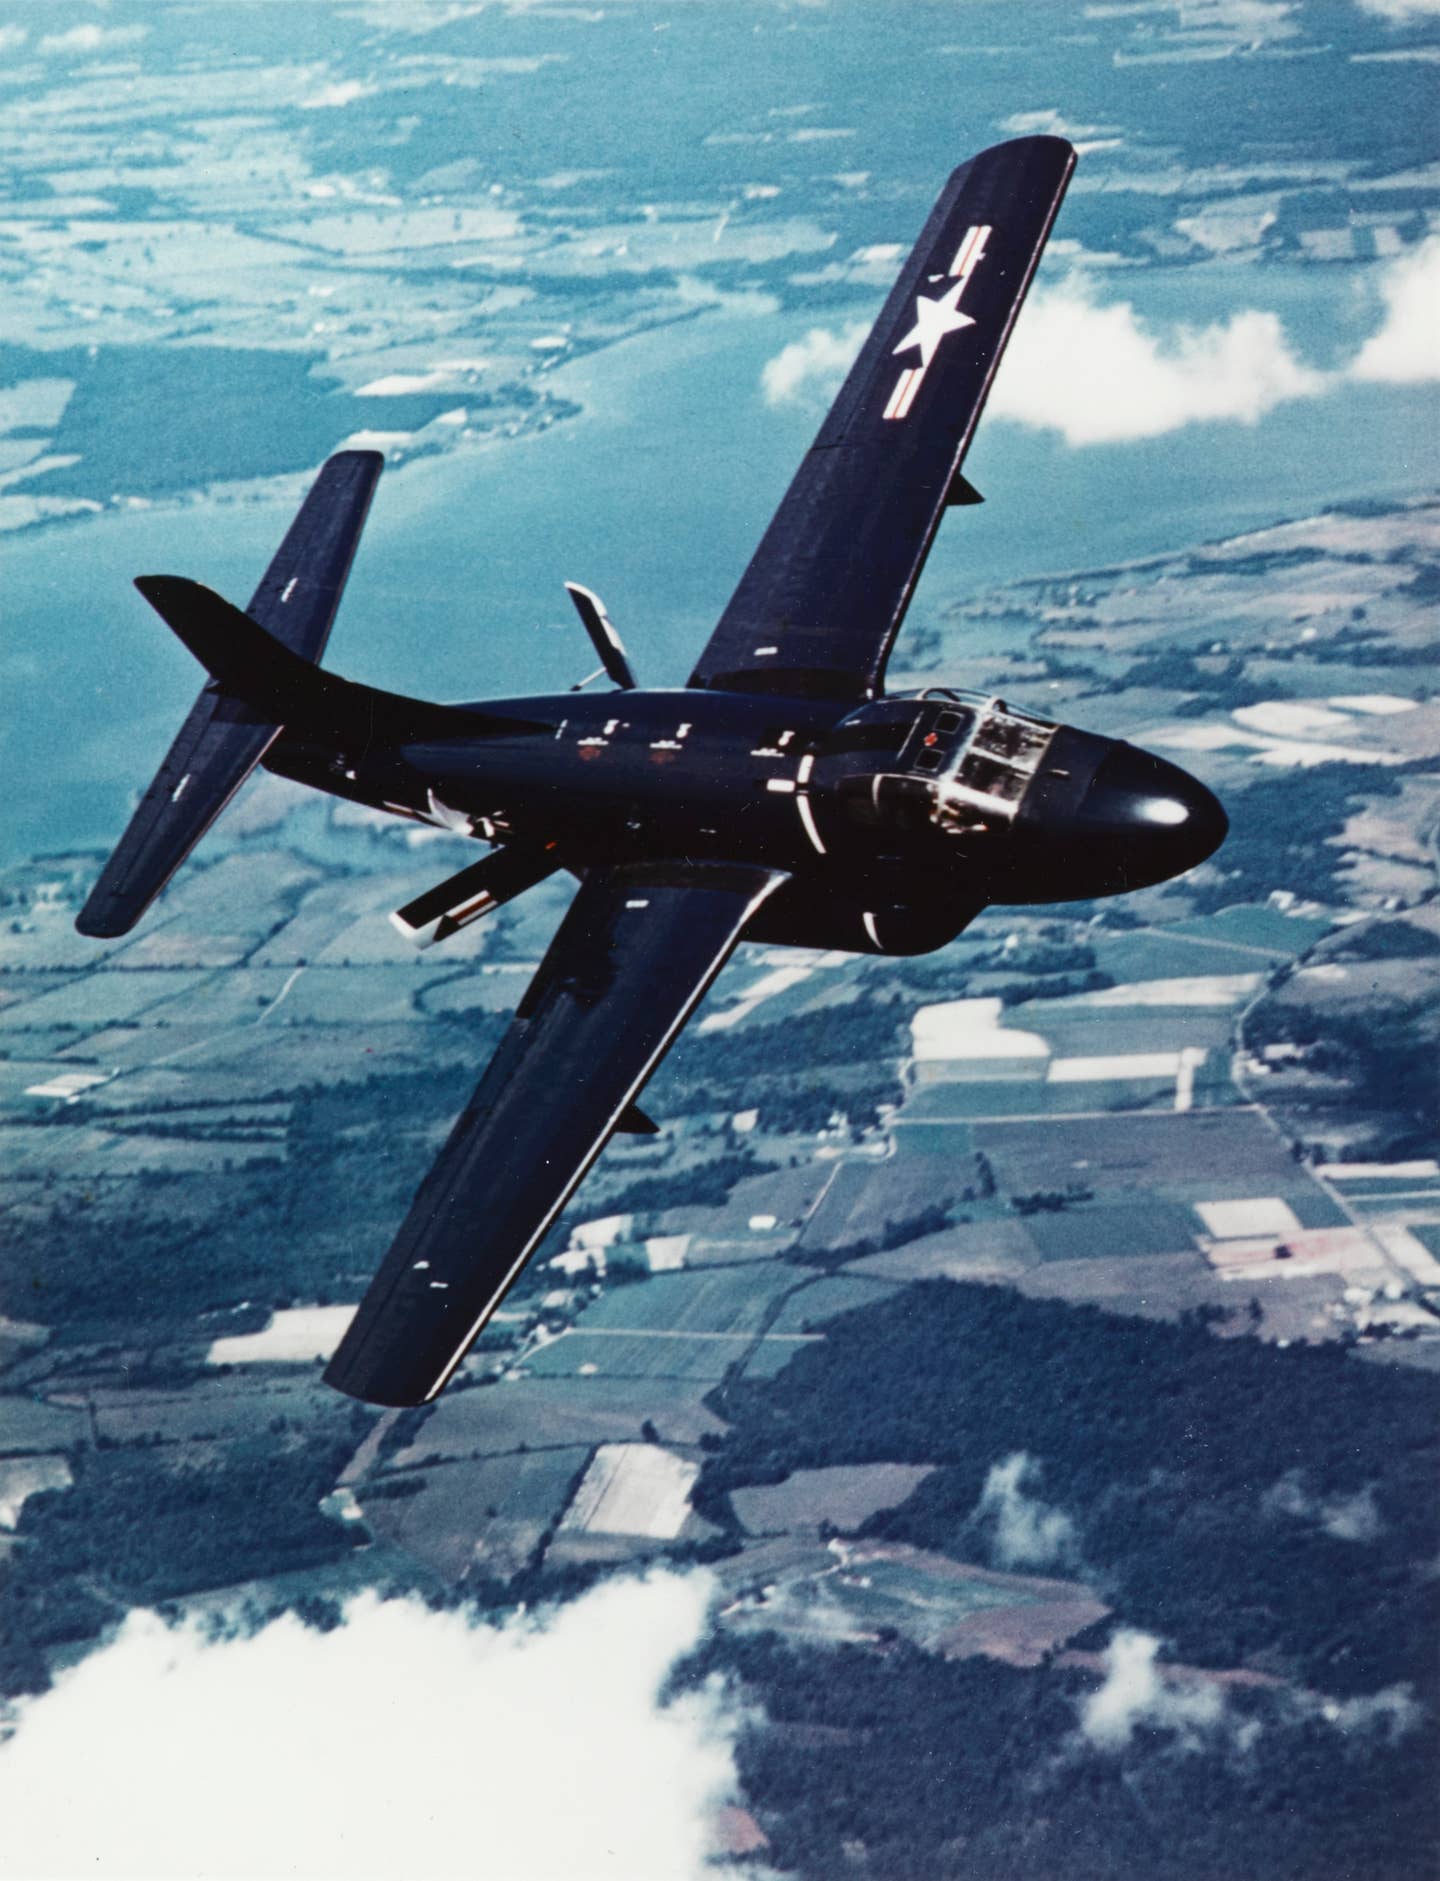 message-editor%2F1620221778058-douglas_f3d-1_skyknight_in_flight_near_naval_air_station_patuxent_river_circa_in_the_1950s_nh_101805-kn.jpg